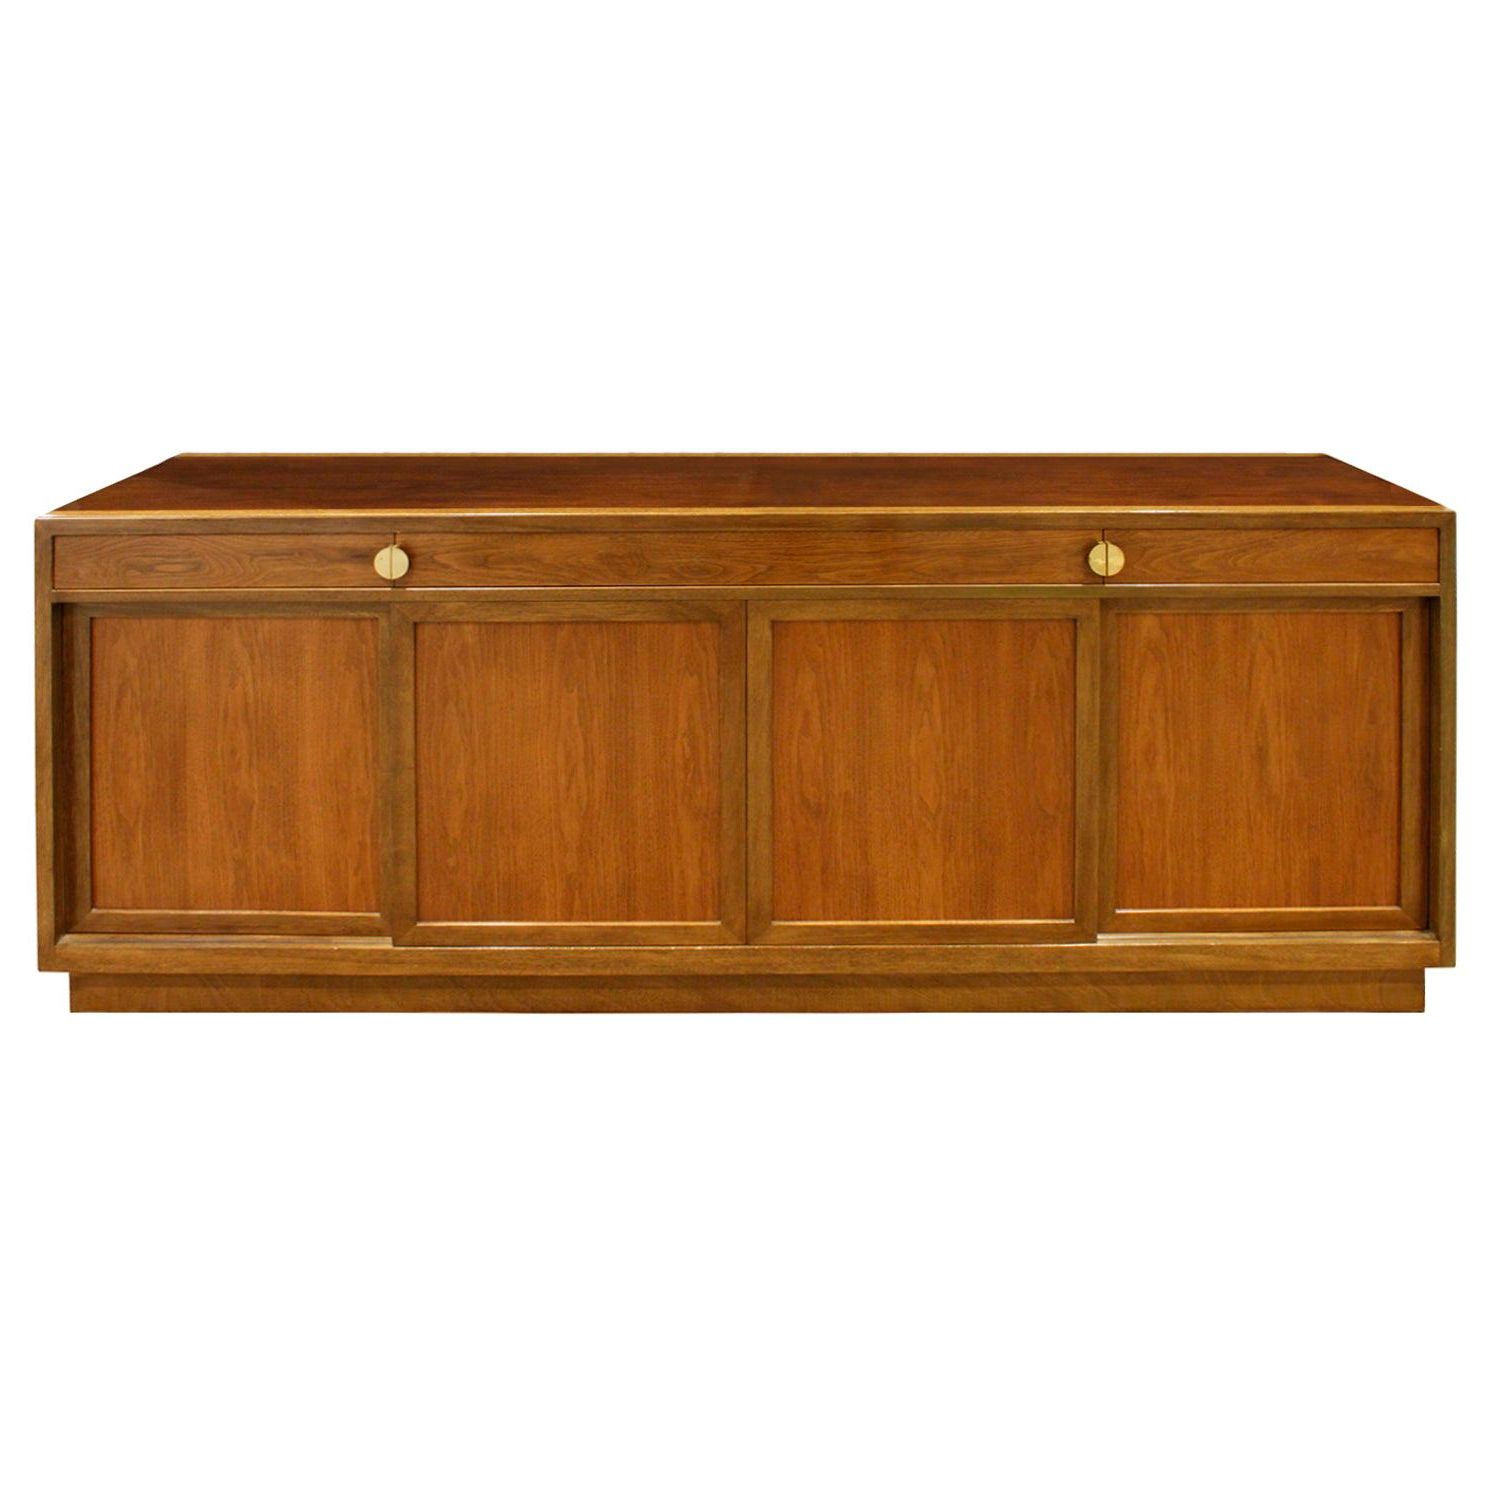 Trendy Gertrude Sideboards Inside Edward Wormley Sideboards – 38 For Sale At 1stdibs (View 12 of 20)